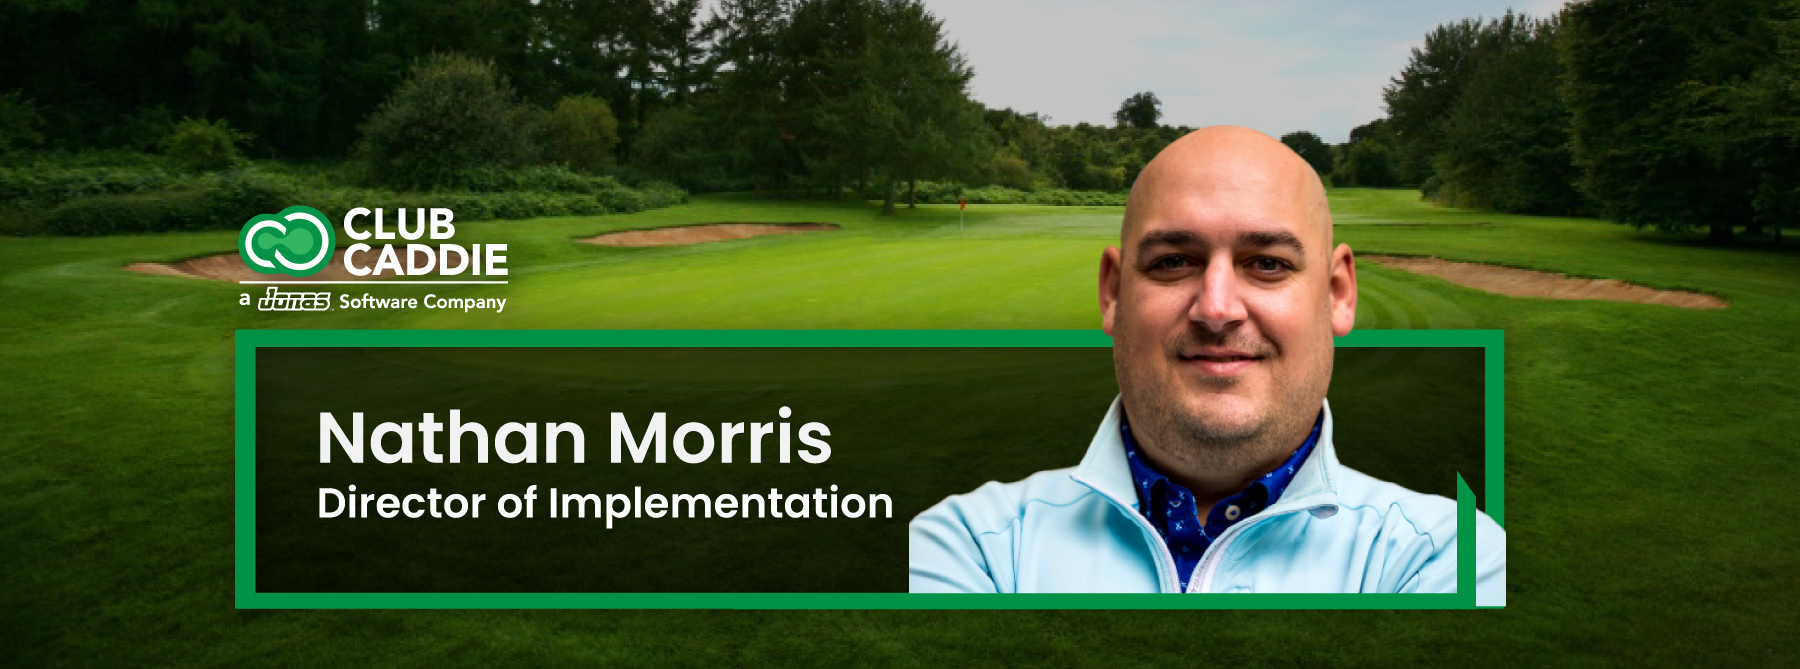 Nathan Morris, Director of Implementation for Club Caddie 